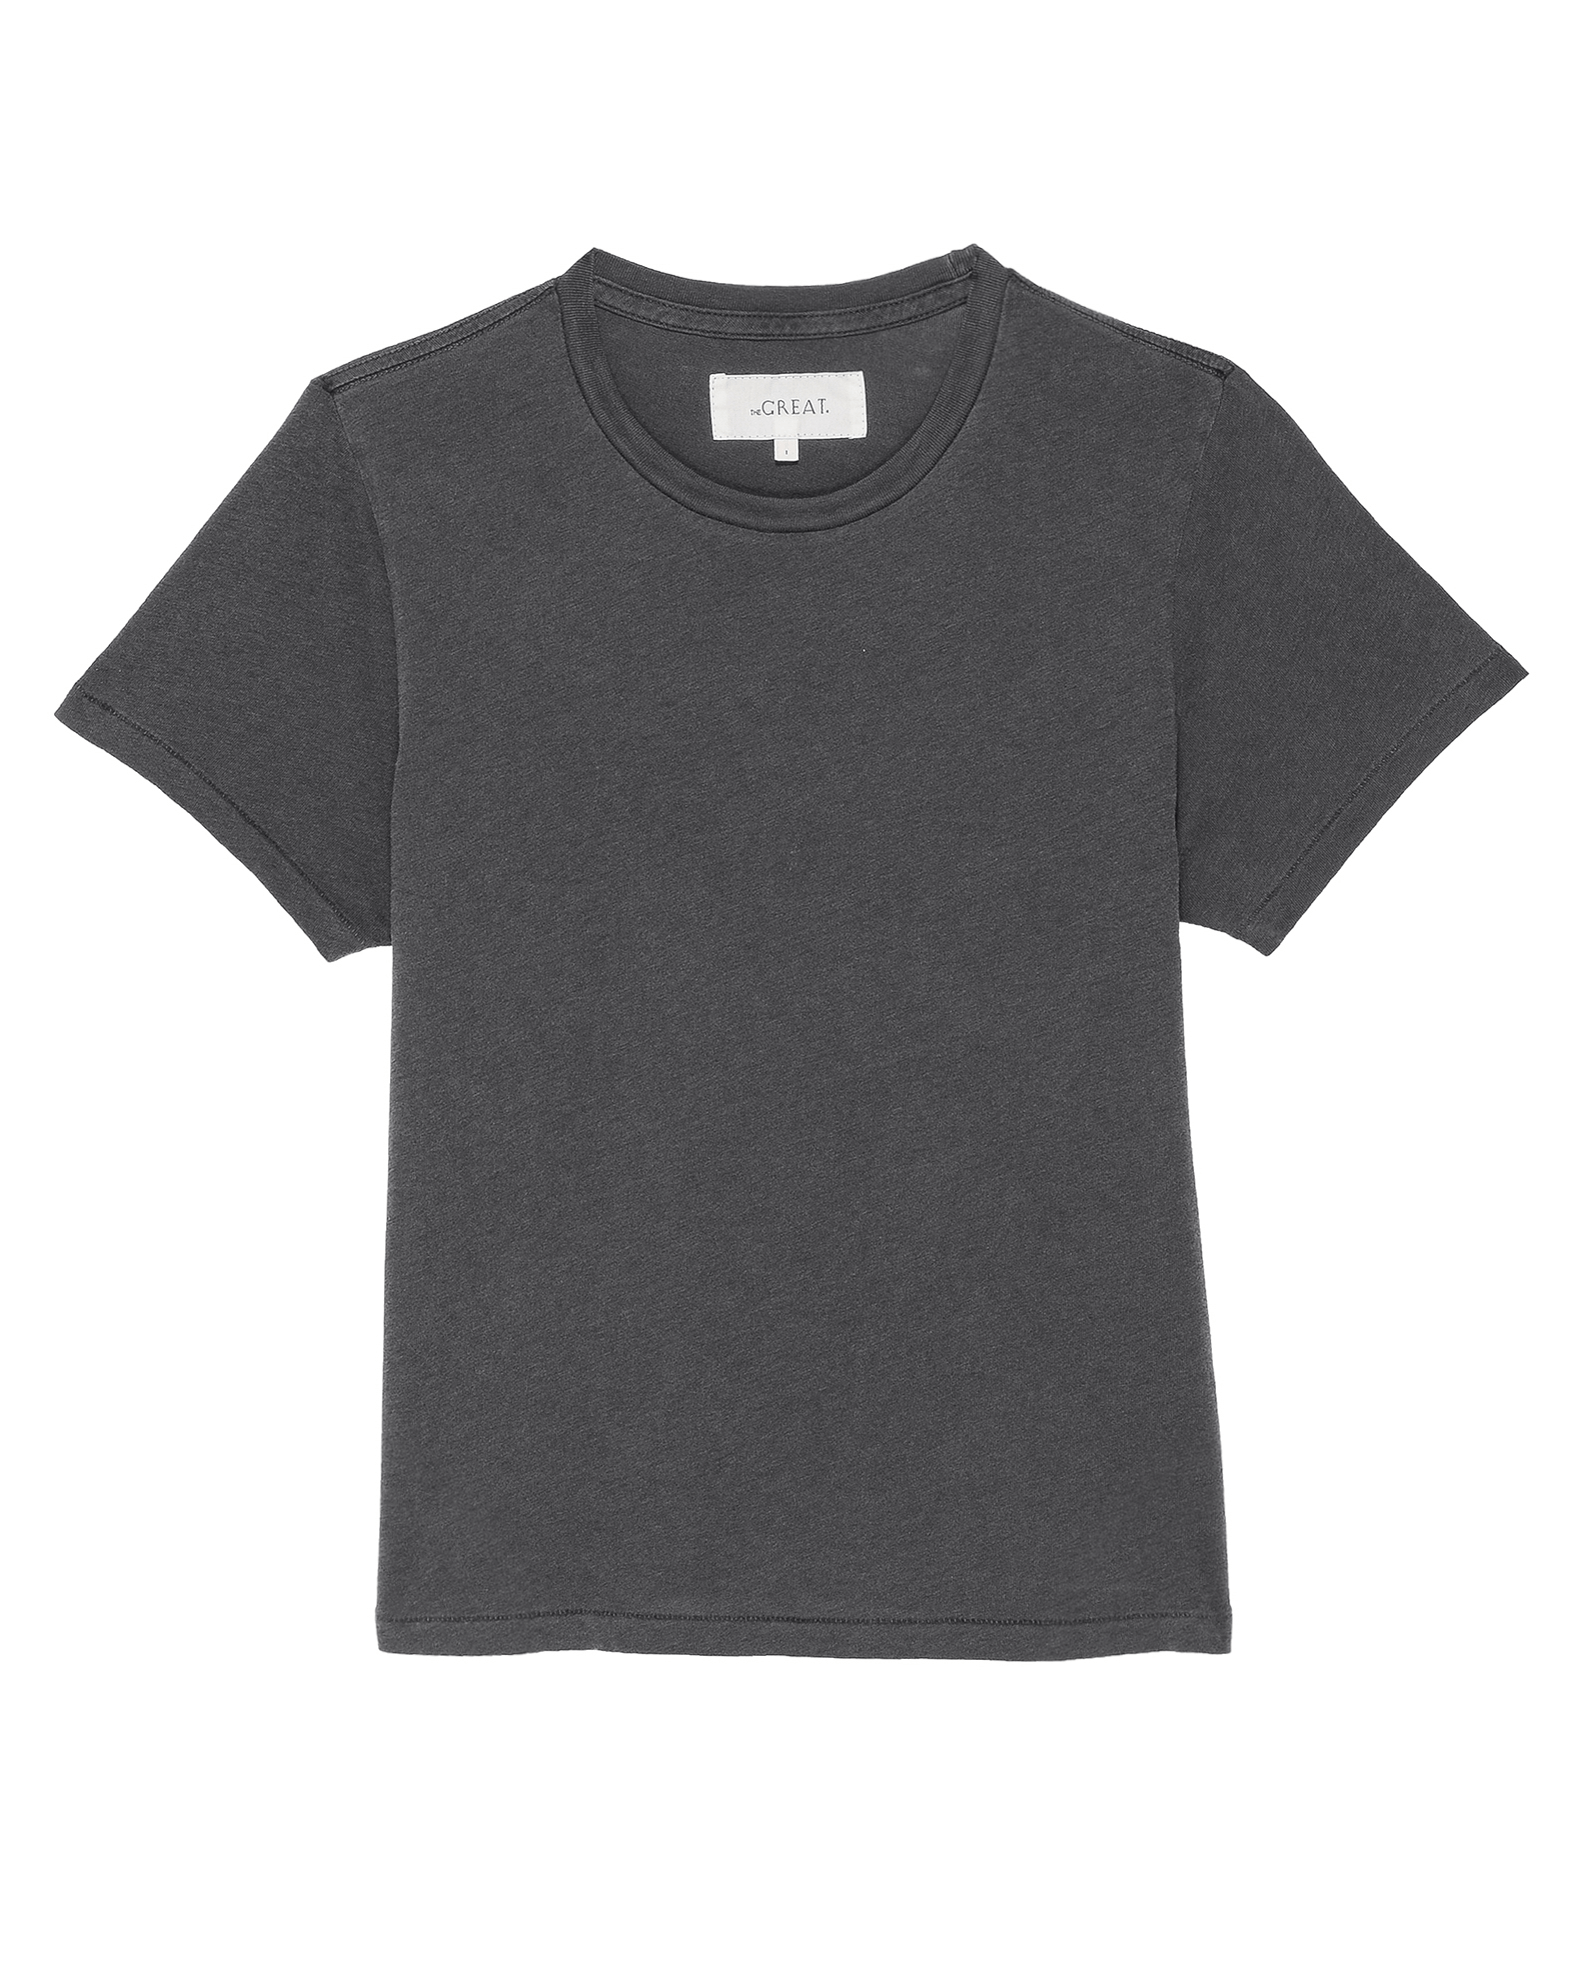 The Little Tee. -- Washed Black TEES THE GREAT. SP22 APRILCAP